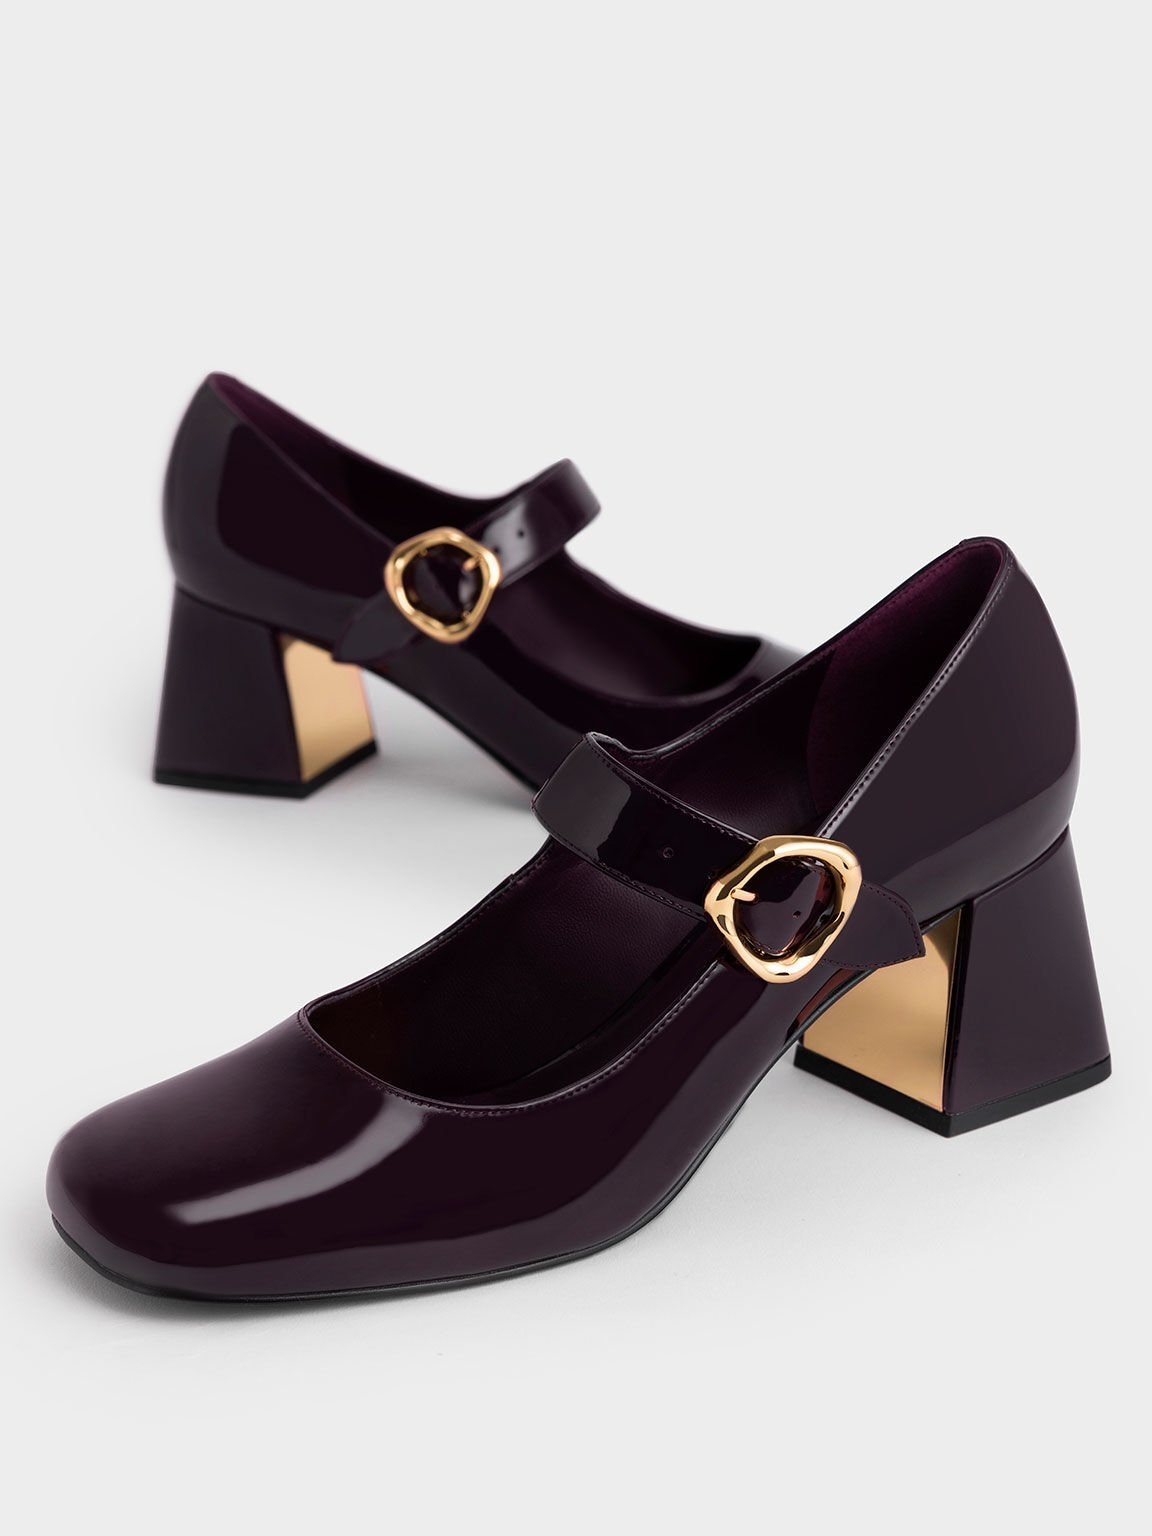 Maroon Patent Buckled Mary Jane Pumps - CHARLES & KEITH AU